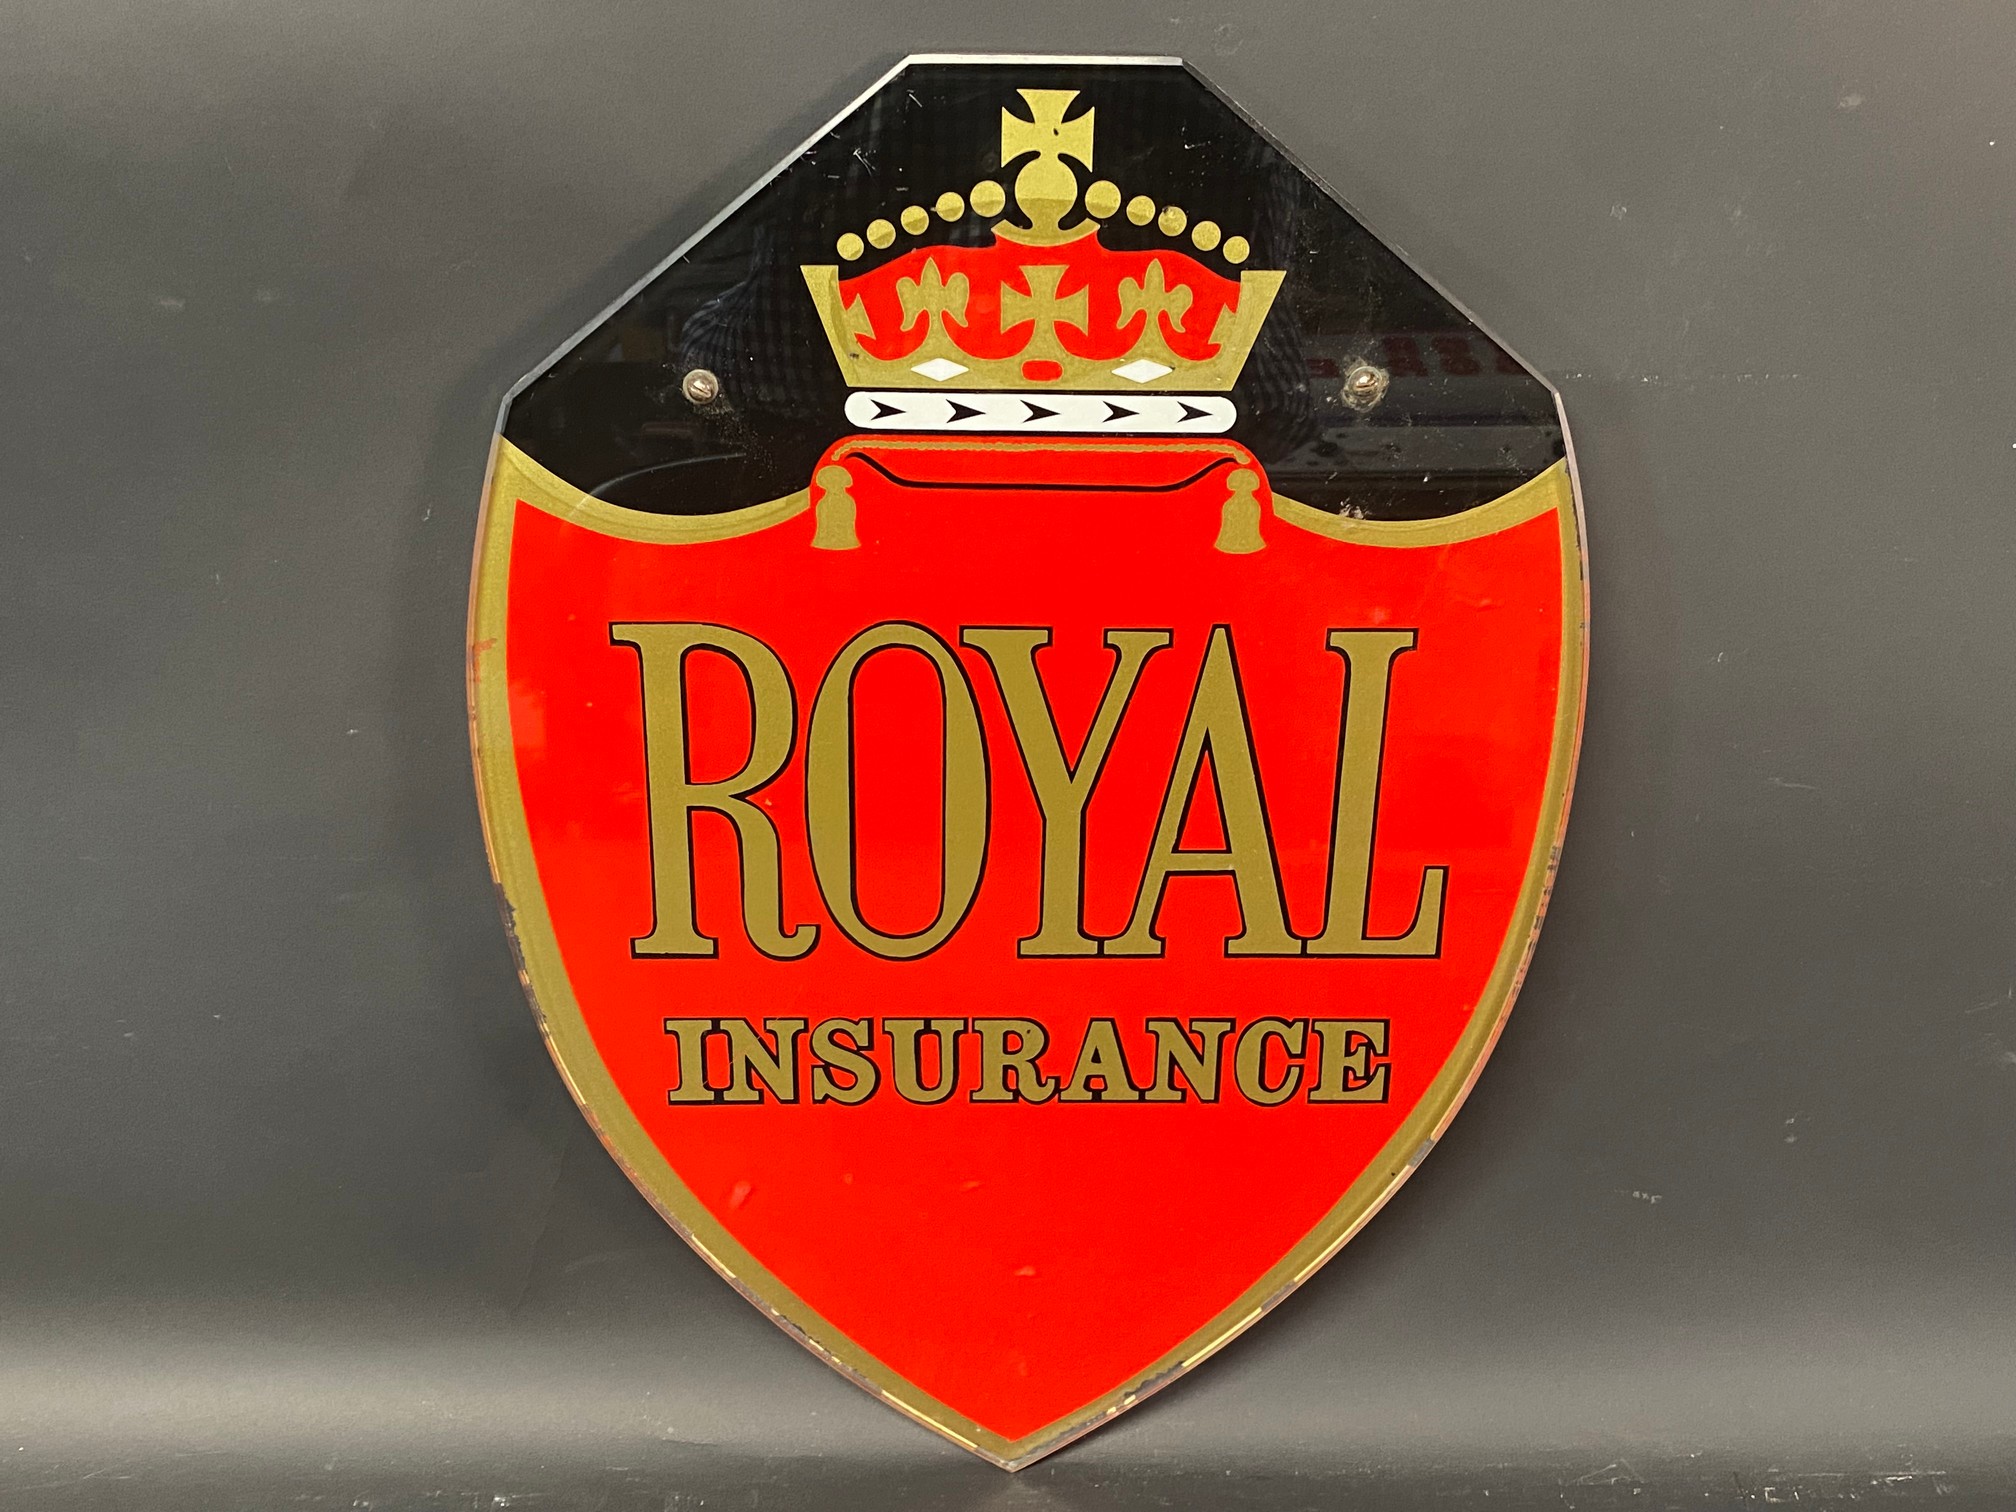 A Royal Insurance shield shaped glass advertising sign, 12 x 17".